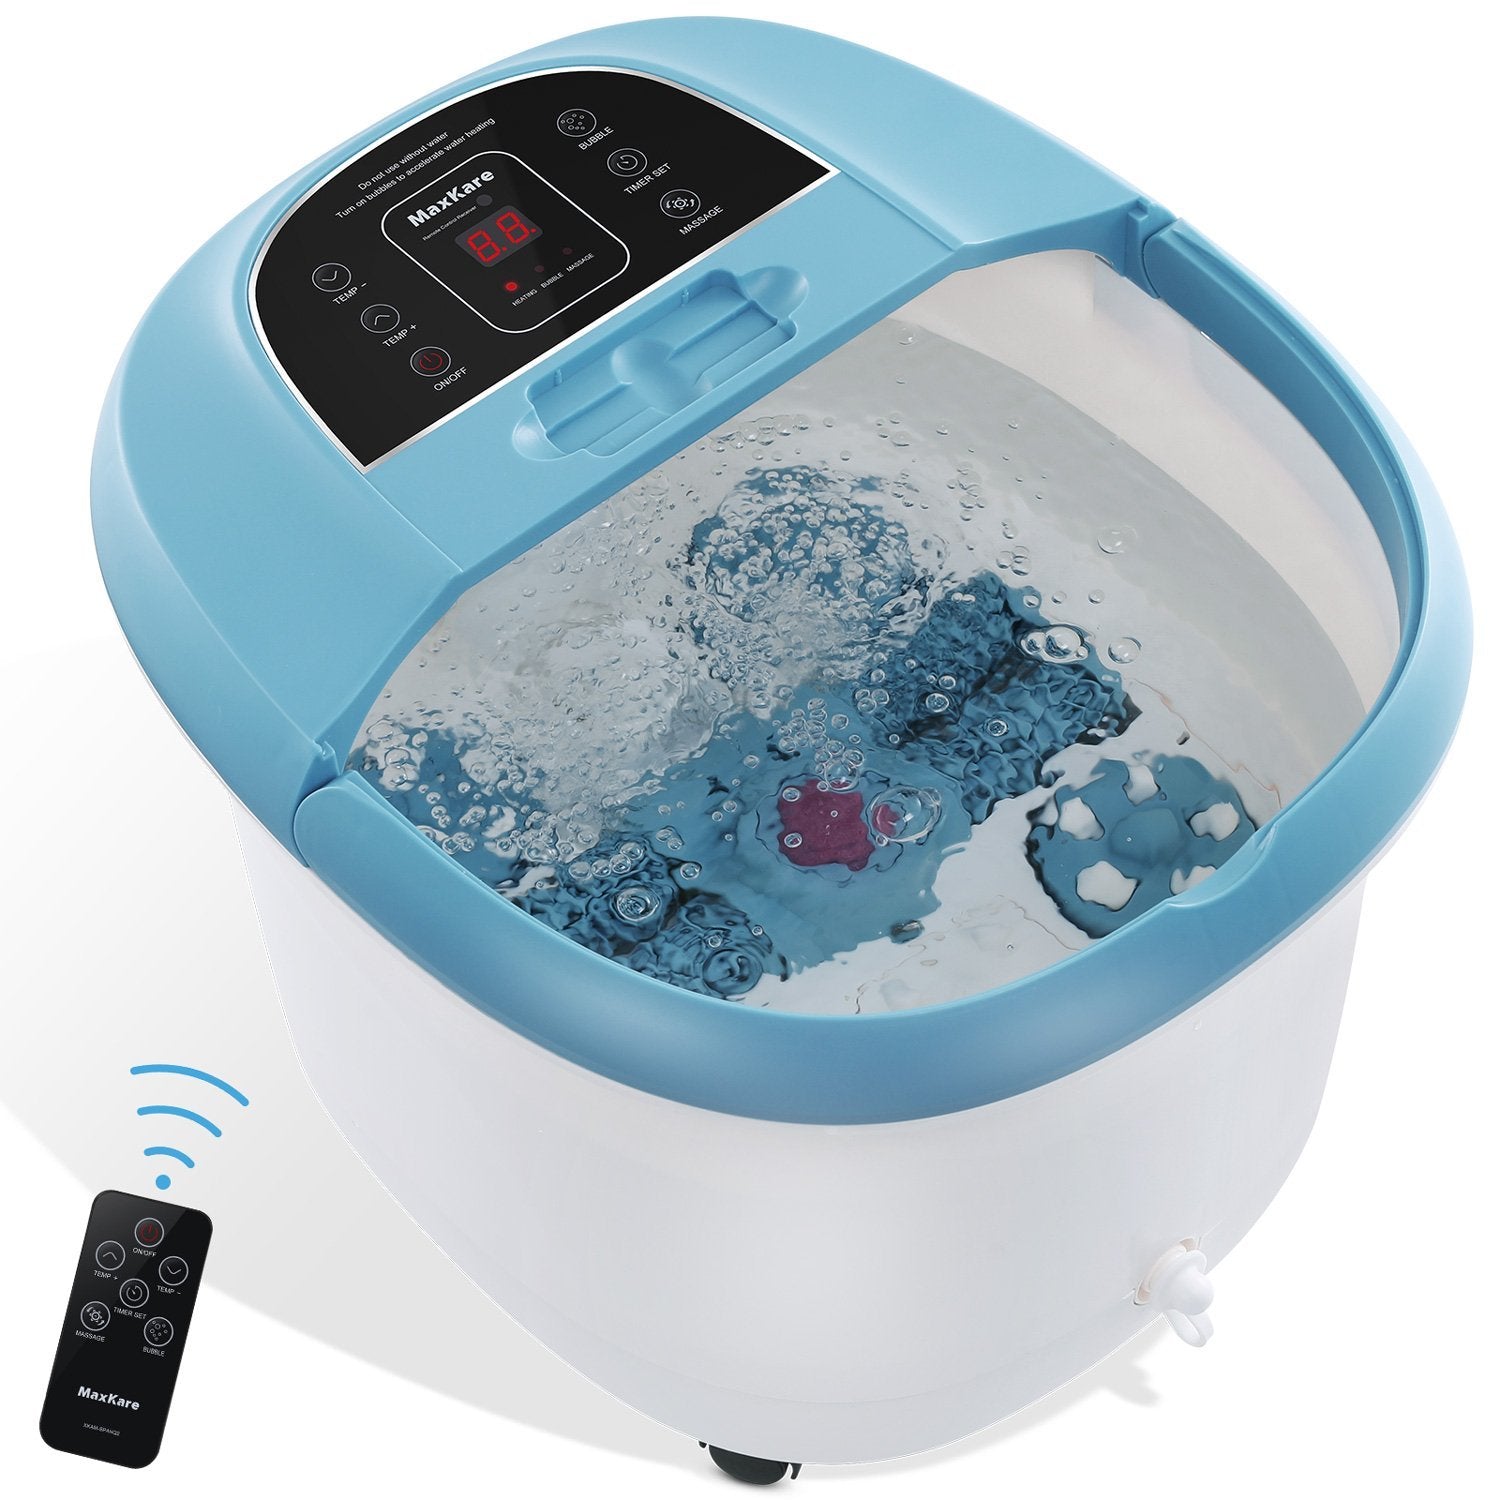 http://www.maxkare.net/cdn/shop/products/foot-bath-spa-massager-with-wireless-remote-control-and-8-electric-shiatsu-massaging-rollers-heated-foot-bath-tub-with-heat-bubbles-vibration-to-relieve-feet-mu-684115.jpg?v=1626676605